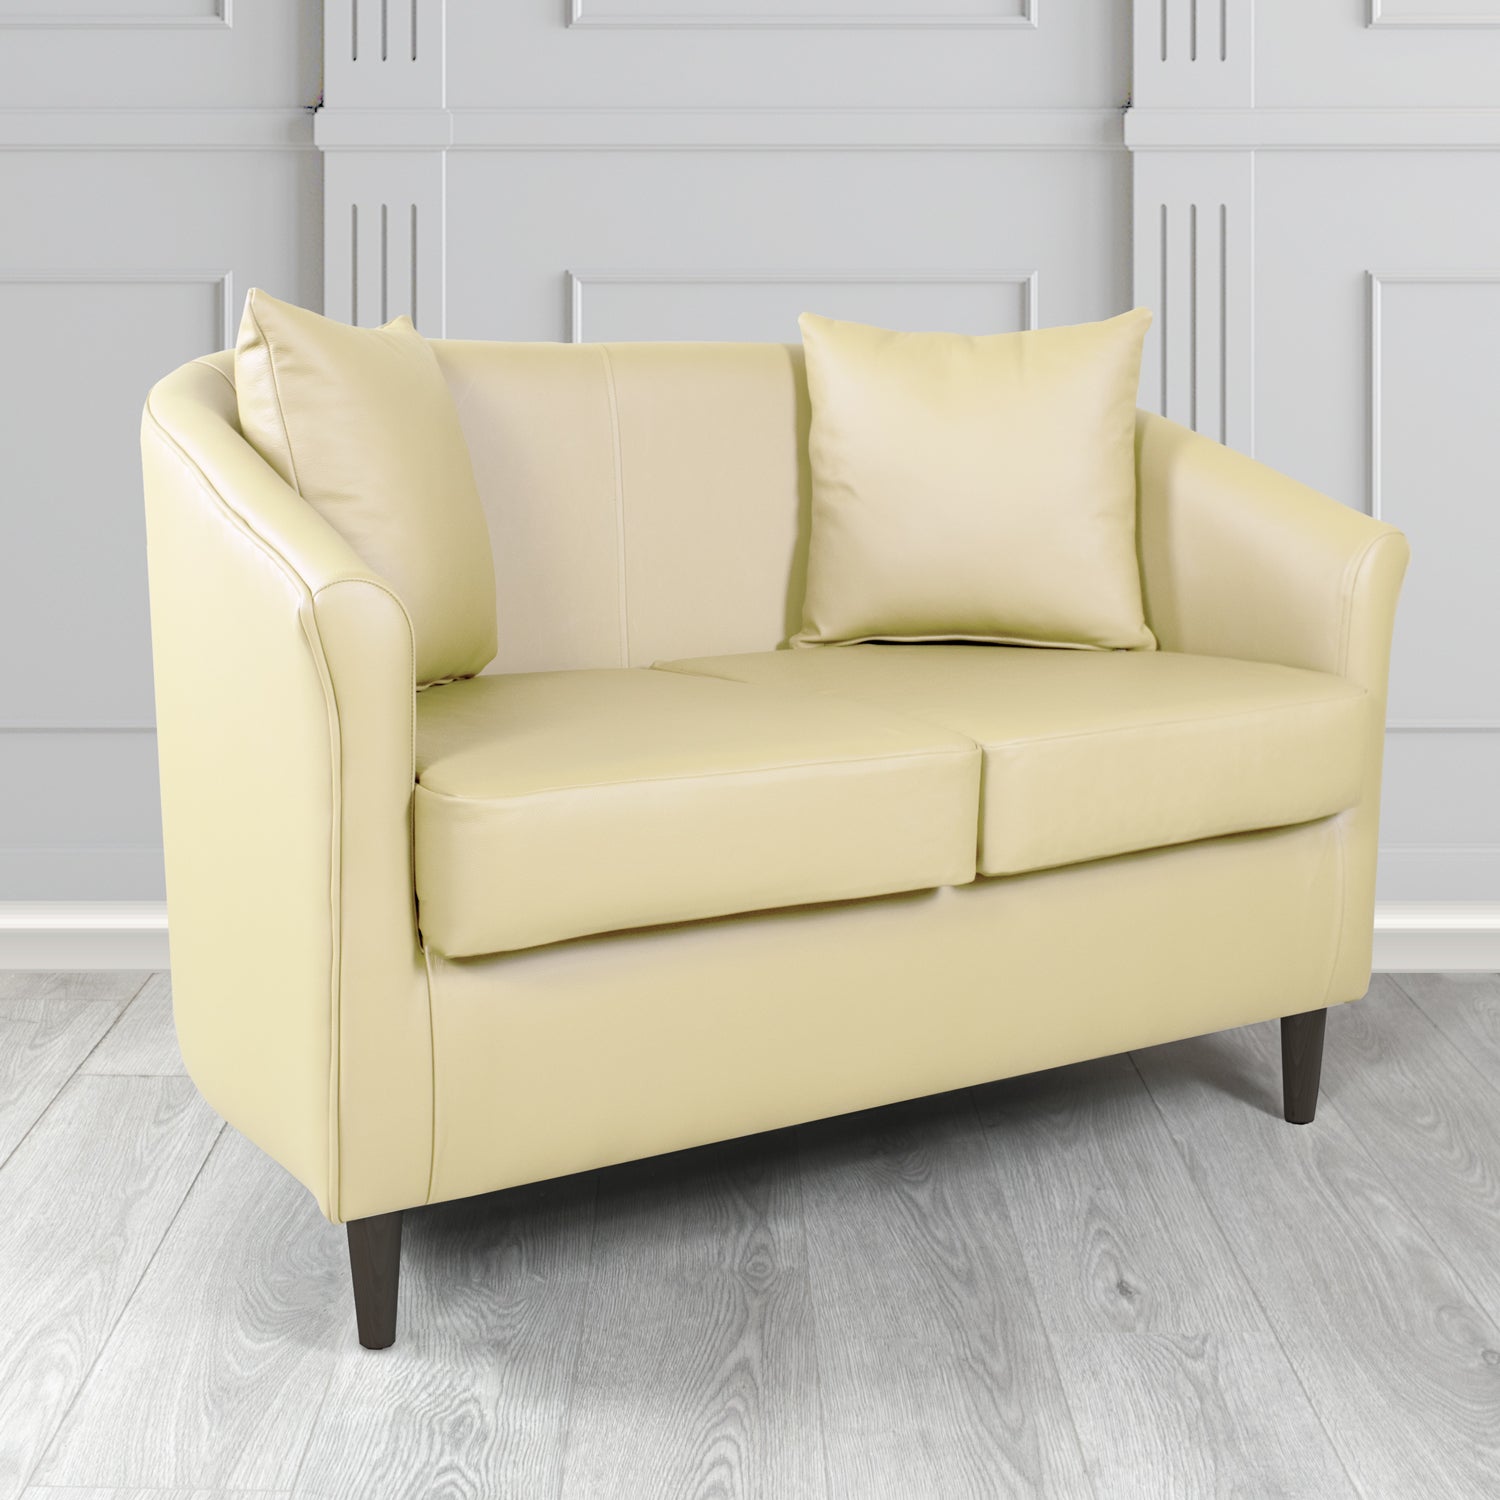 St Tropez Shelly Panna Crib 5 Genuine Leather 2 Seater Tub Sofa with Scatter Cushions - The Tub Chair Shop